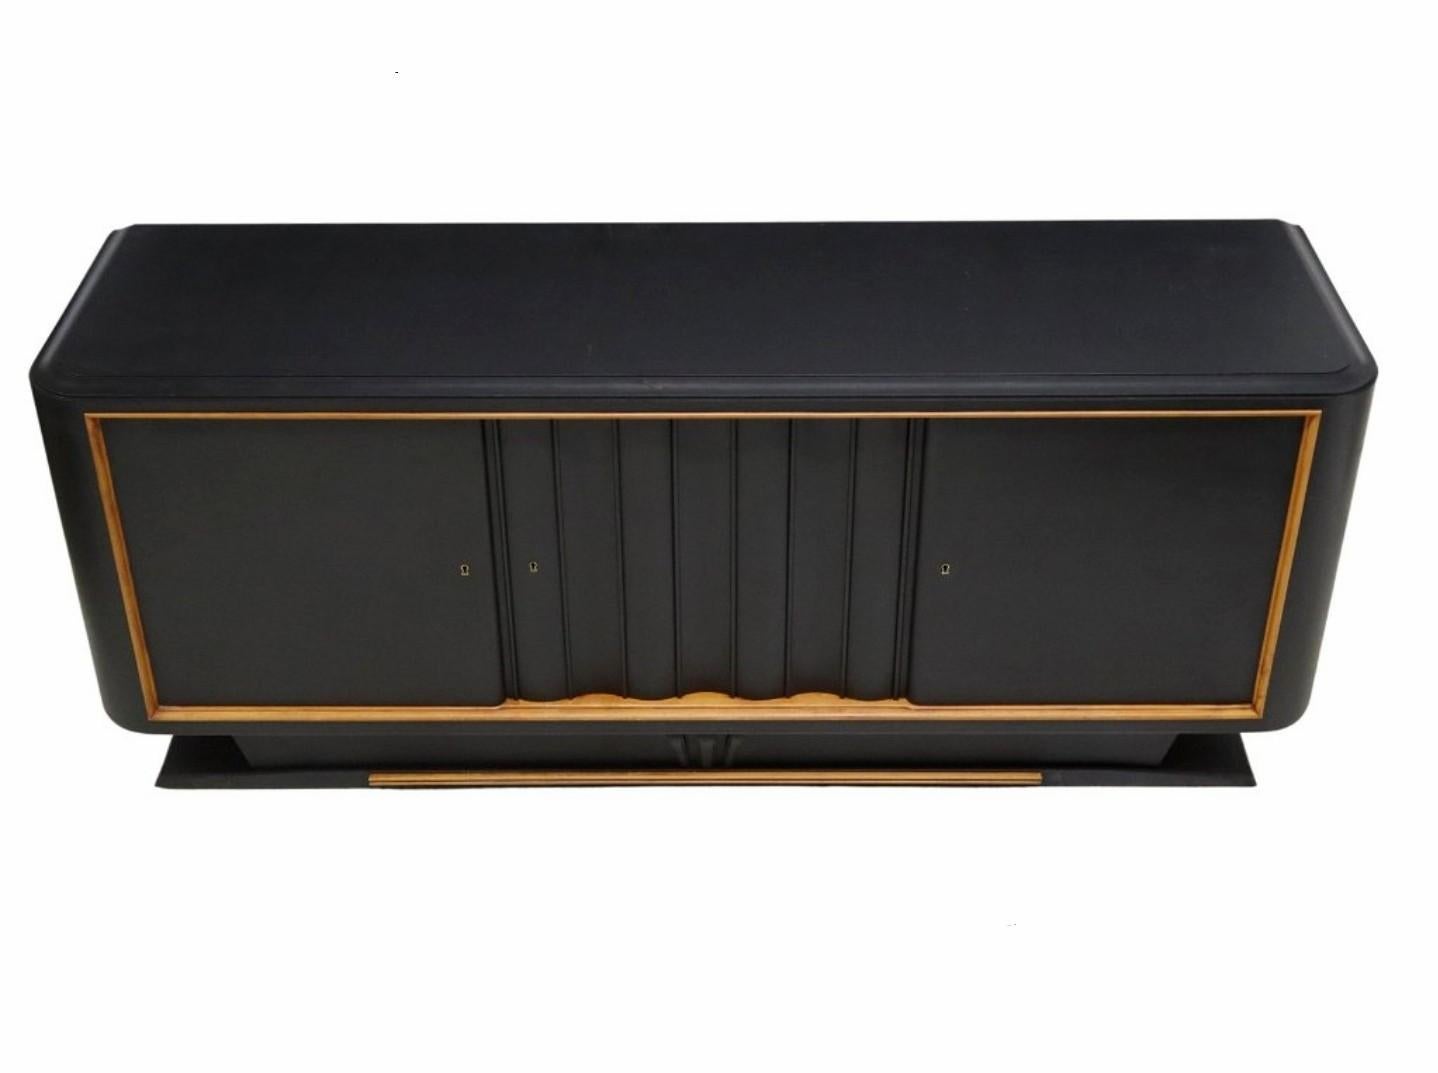 Hand-Crafted French Art Deco Moderne Painted Black Credenza Sideboard 